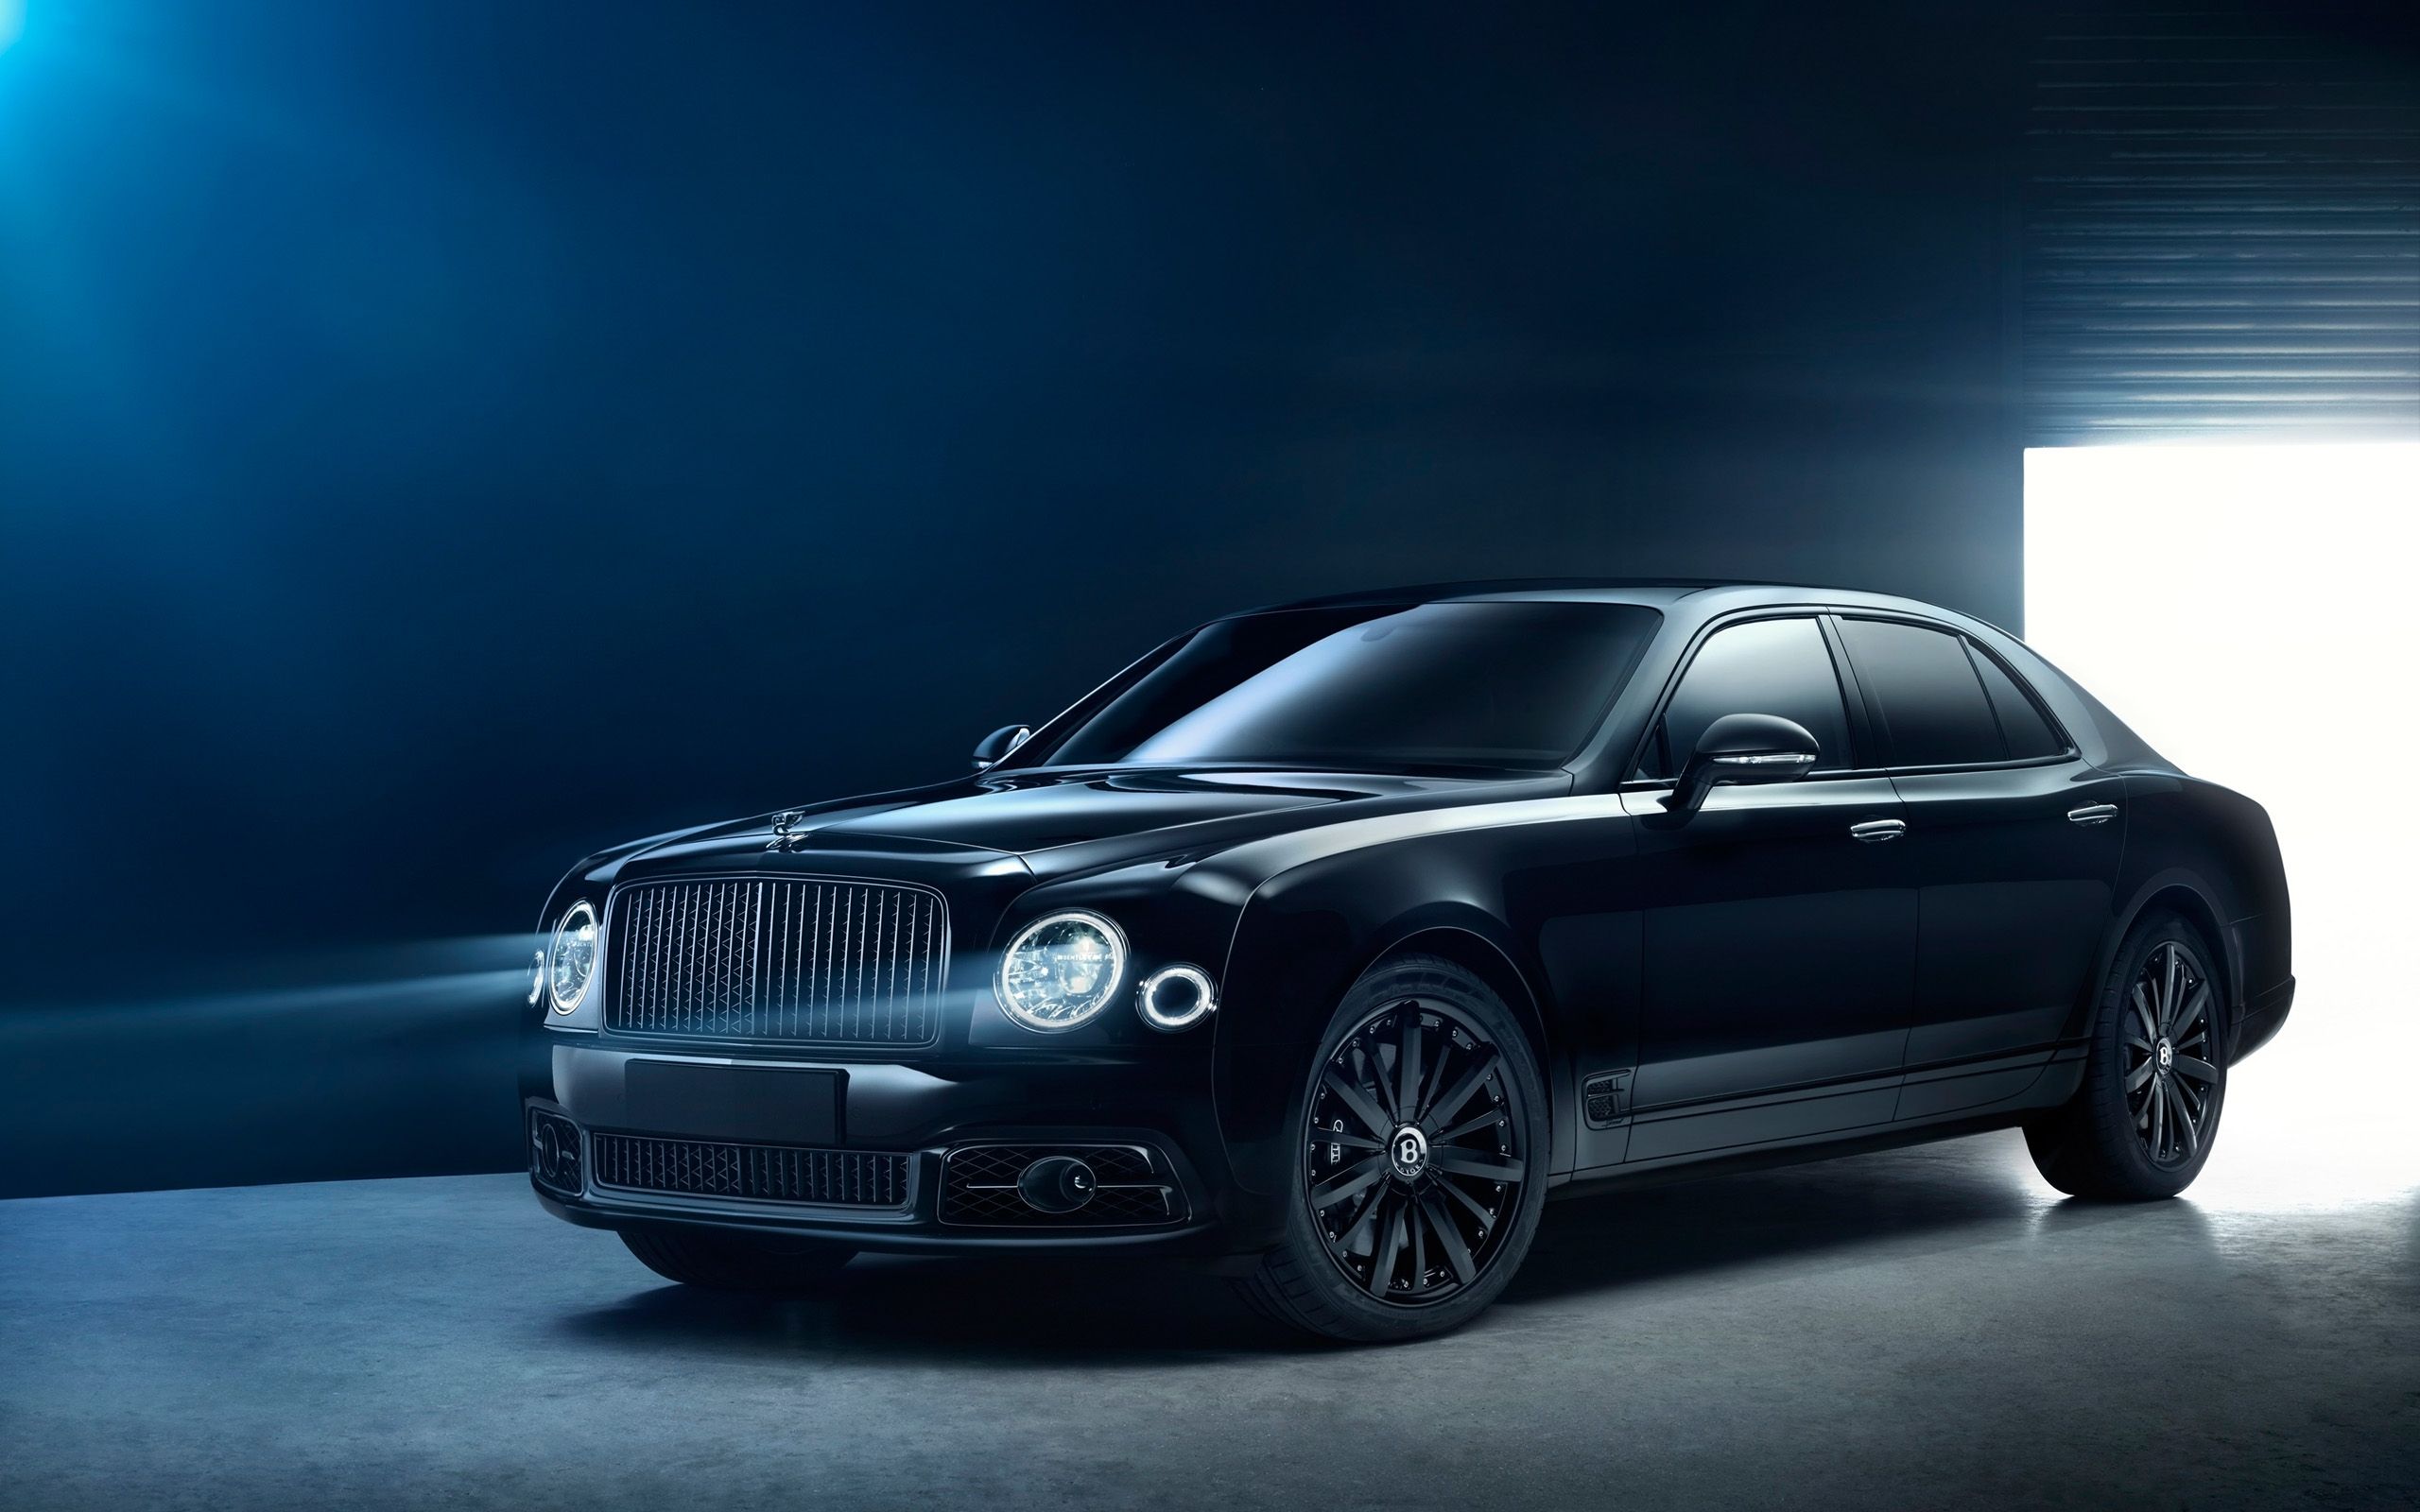 Bentley 4K wallpaper for your desktop or mobile screen free and easy to download